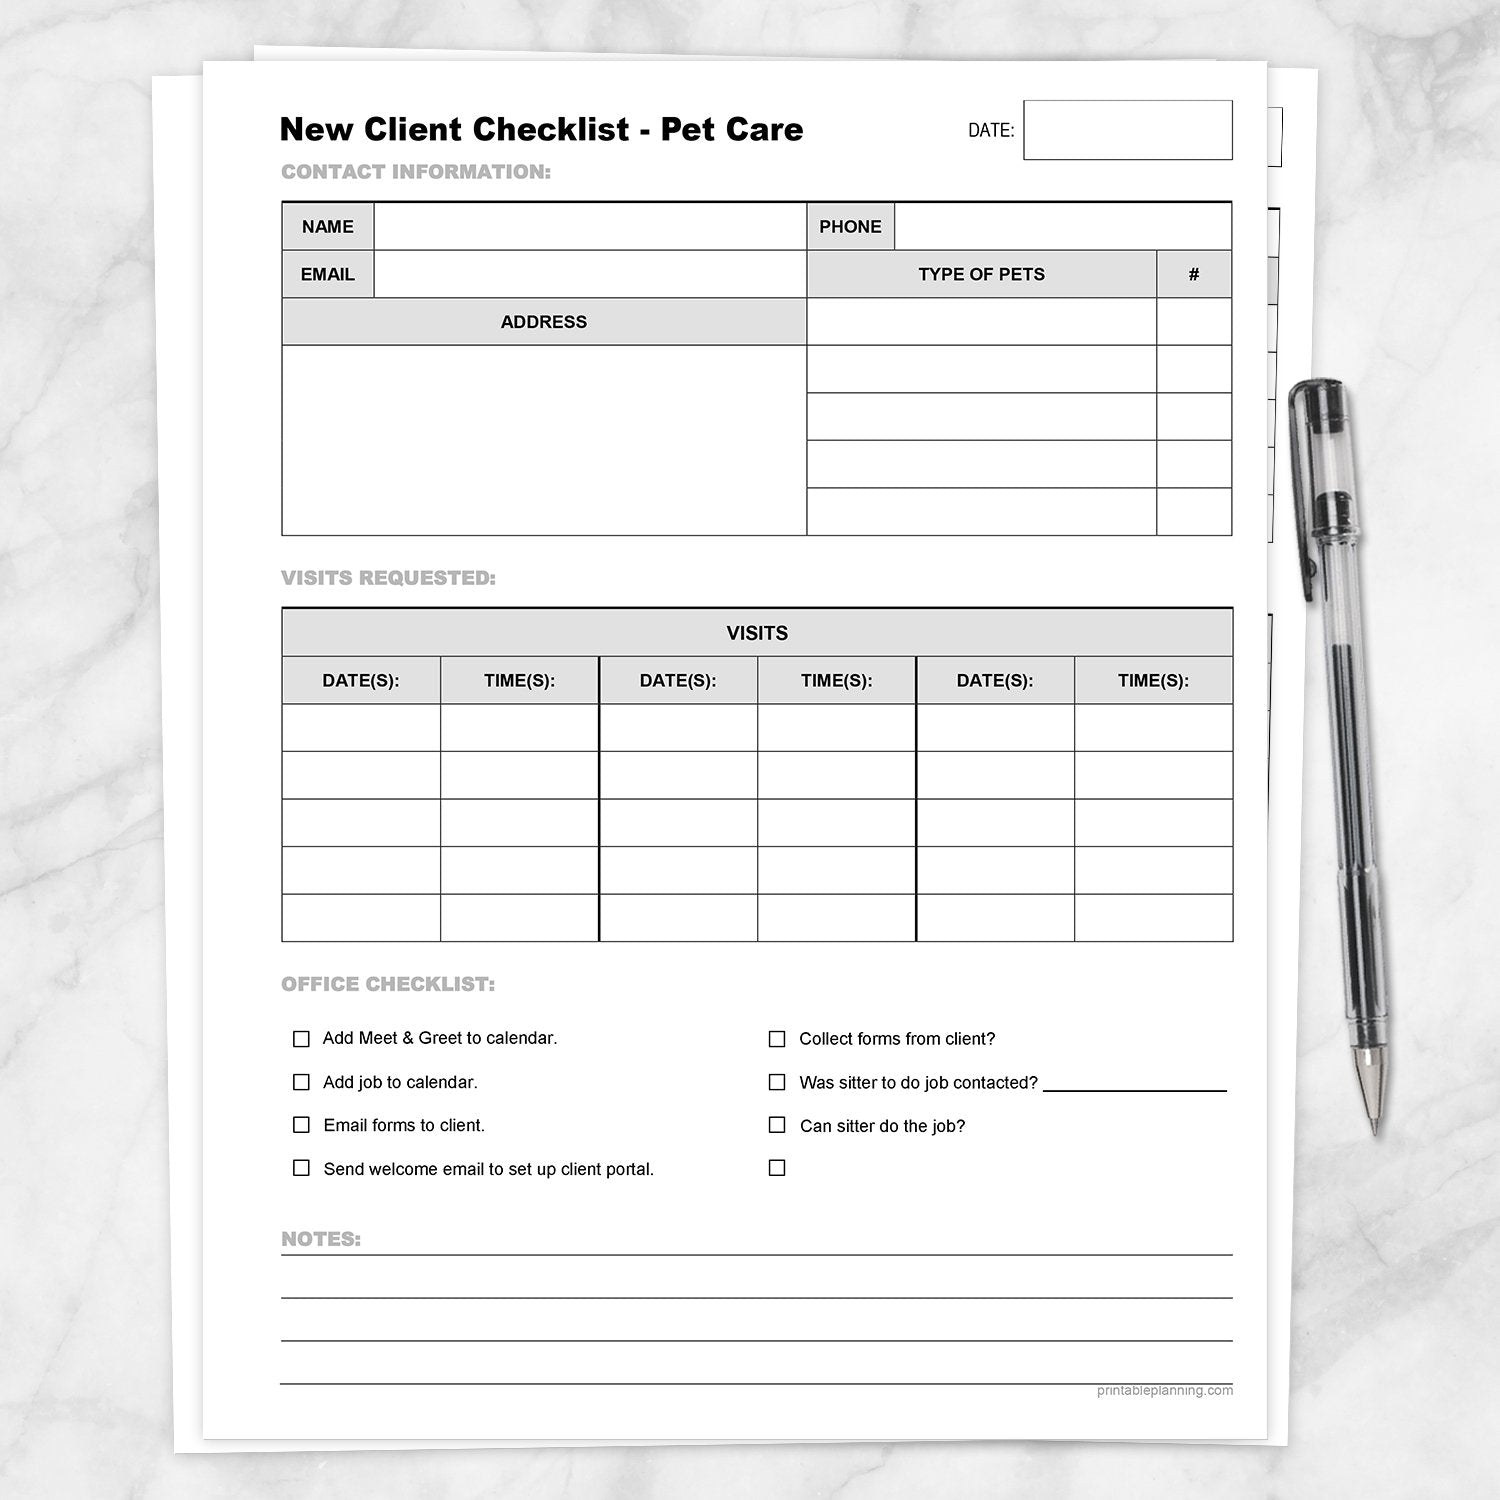 Printable Pet Care - New Client Checklist, Visits List at Printable Planning